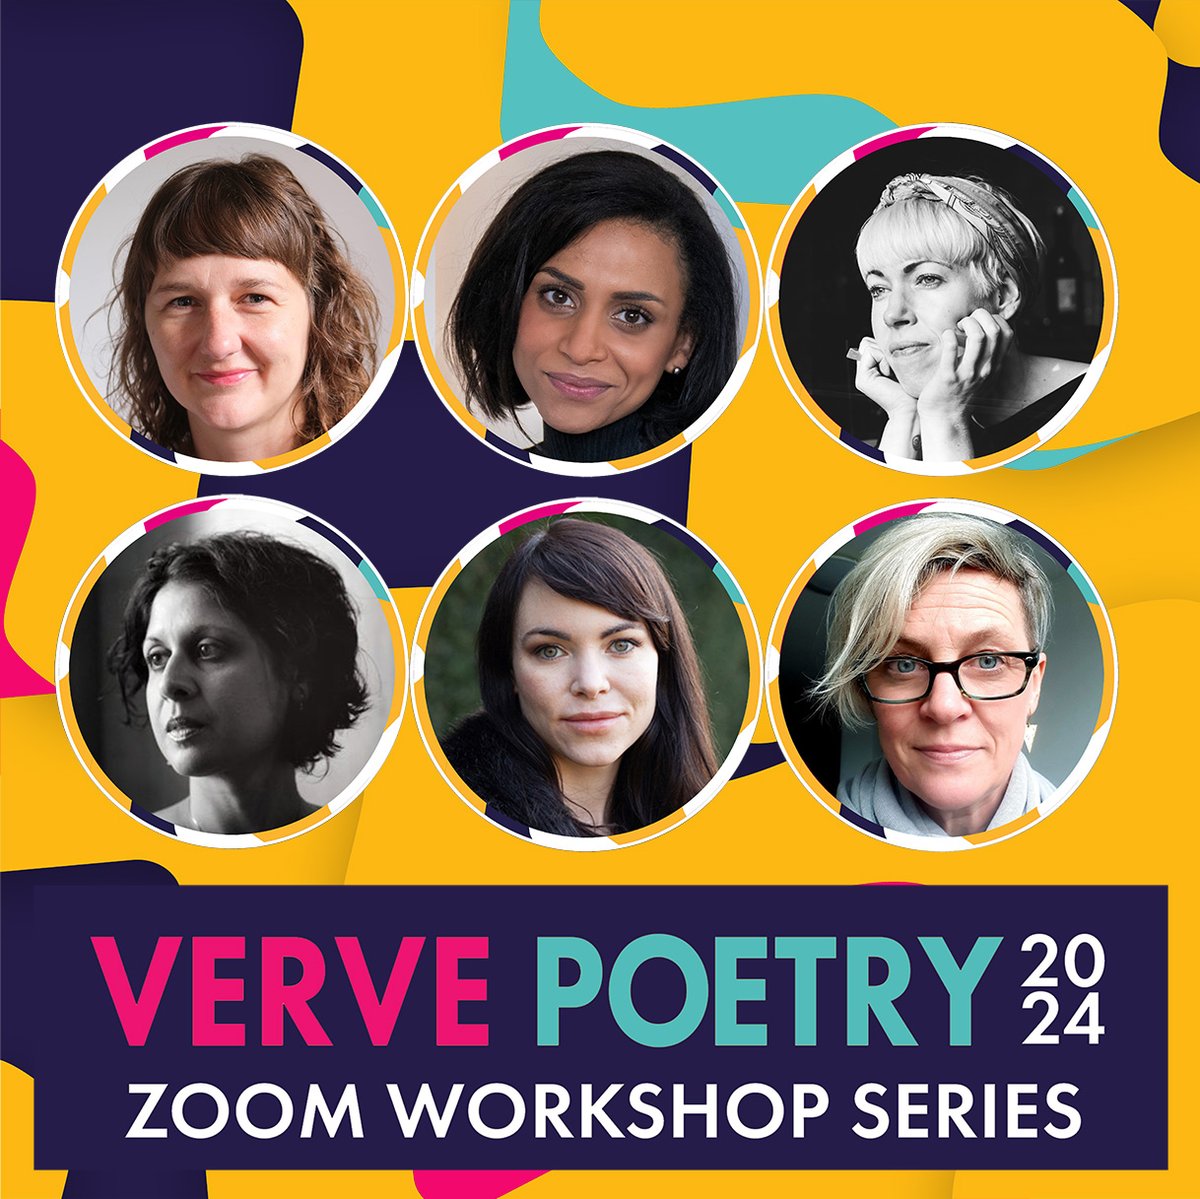 OUR zoom workshops [almost weekly from May - Nov 2024, Tues 7-9pm] are filling up nicely, with discount deals on 3, 6 and 12 wkshp bundles. The 1st 6 wkhps feature @poetclare @rachelnalong @HelenMort #AnthonyCapideo @YvonneReddick & @Jo_Bell. For details: tinyurl.com/3wdtz66v